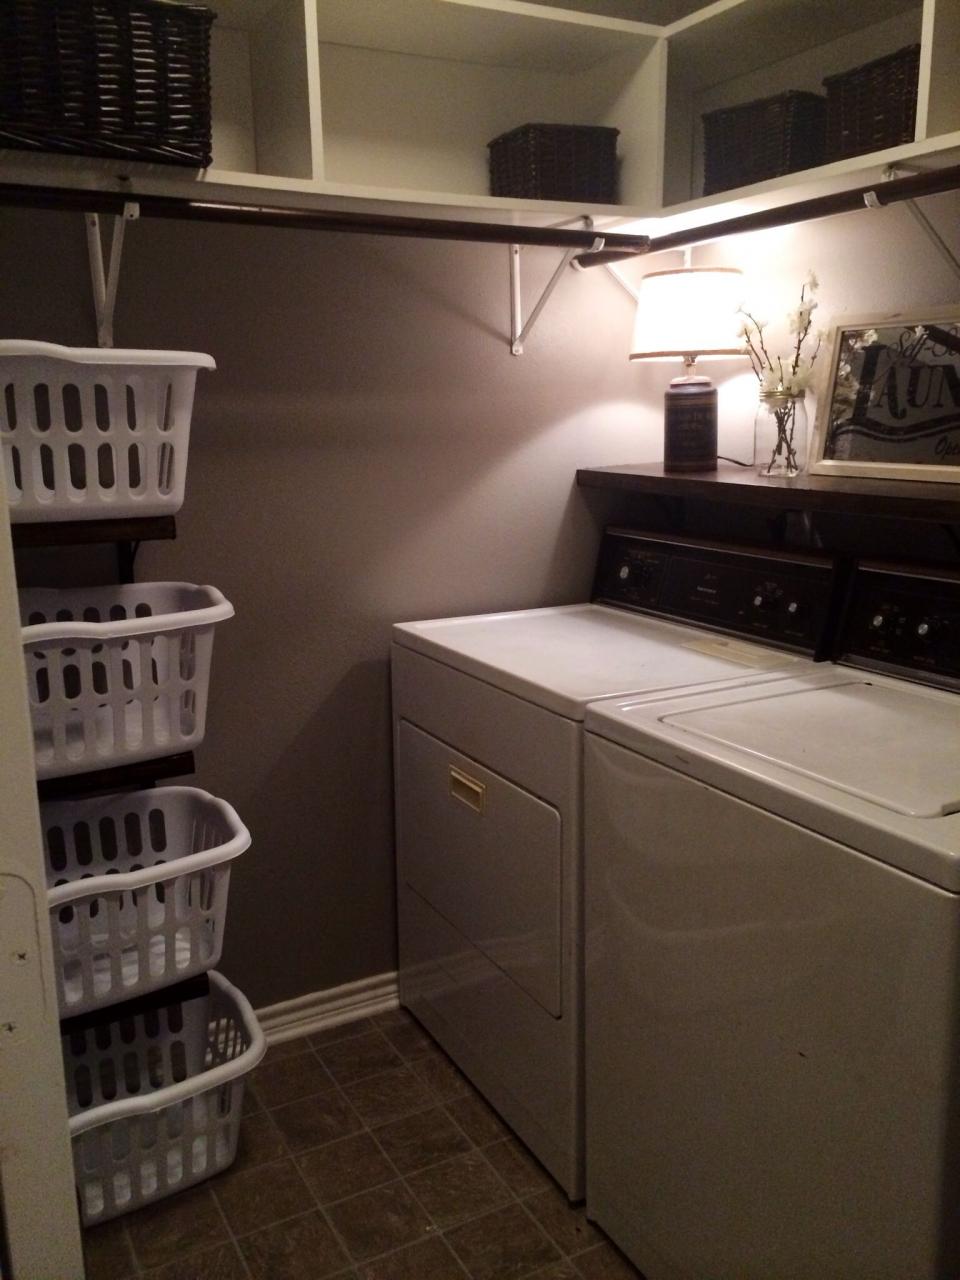 Our laundry room makeover added a 2x12 shelf above the washer and